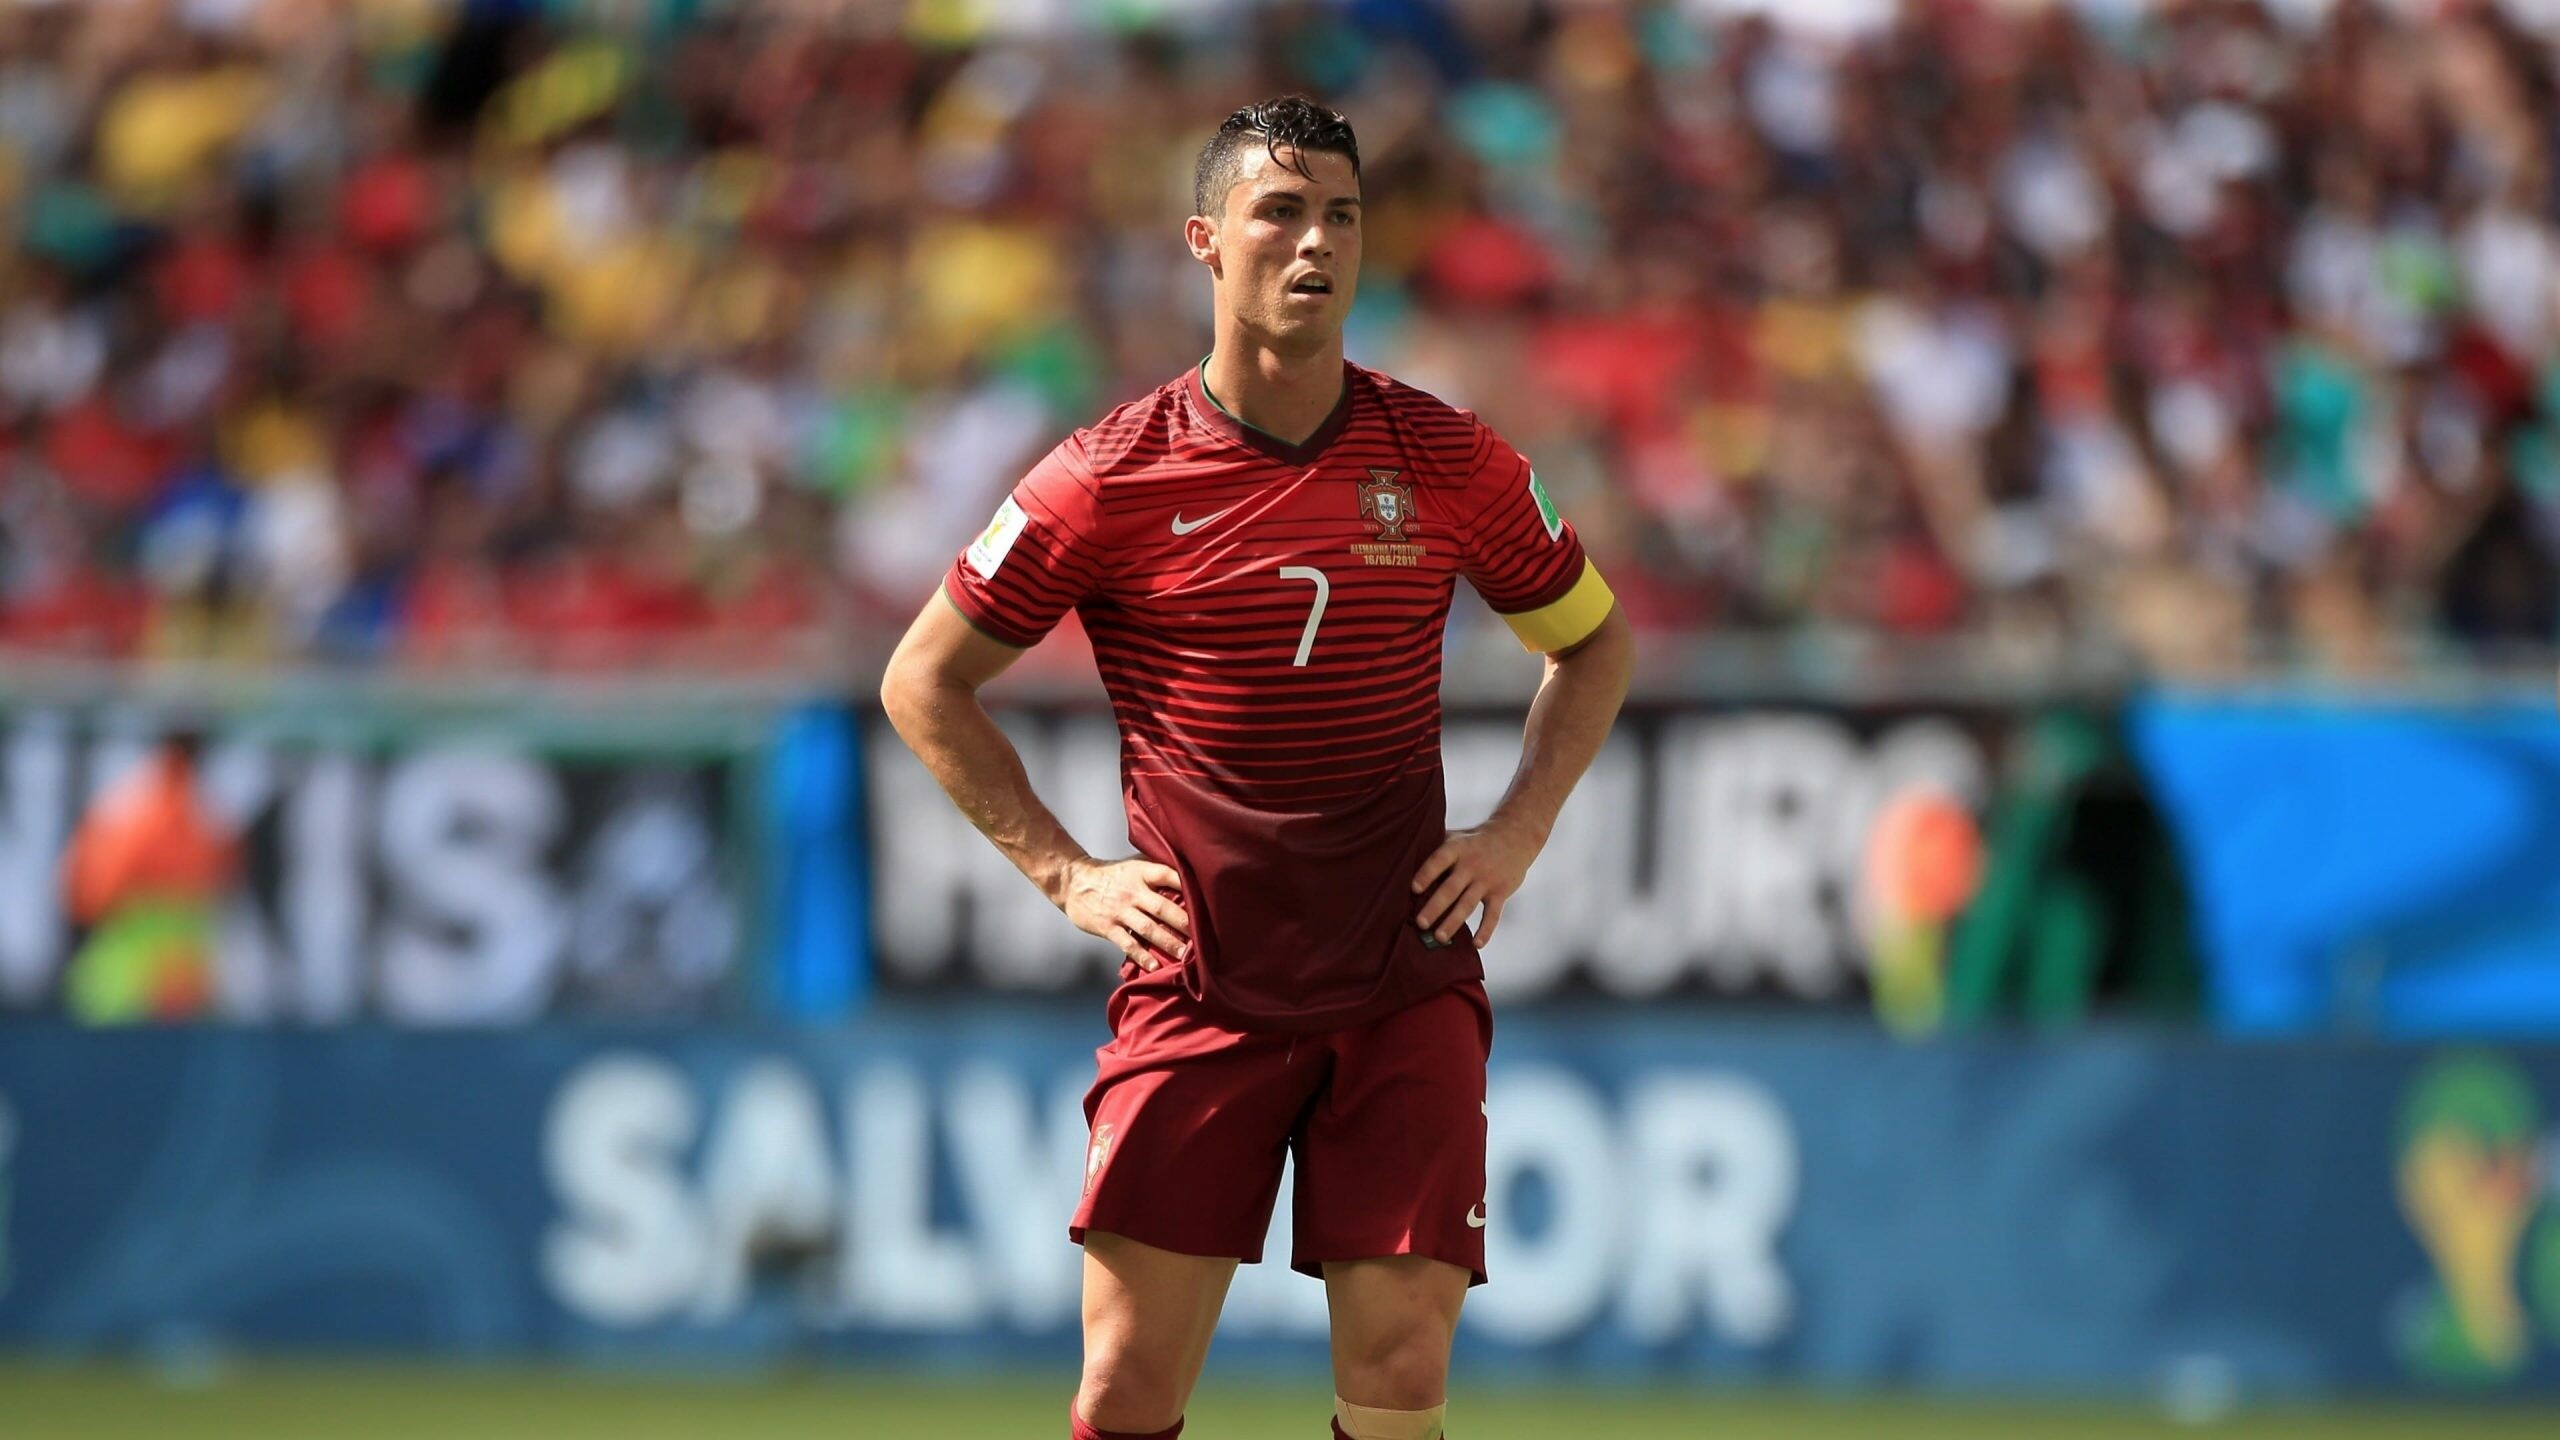 Cristiano Ronaldo, Explore wallpapers, HD and 4K backgrounds, Stunning images, 2560x1440 HD Desktop